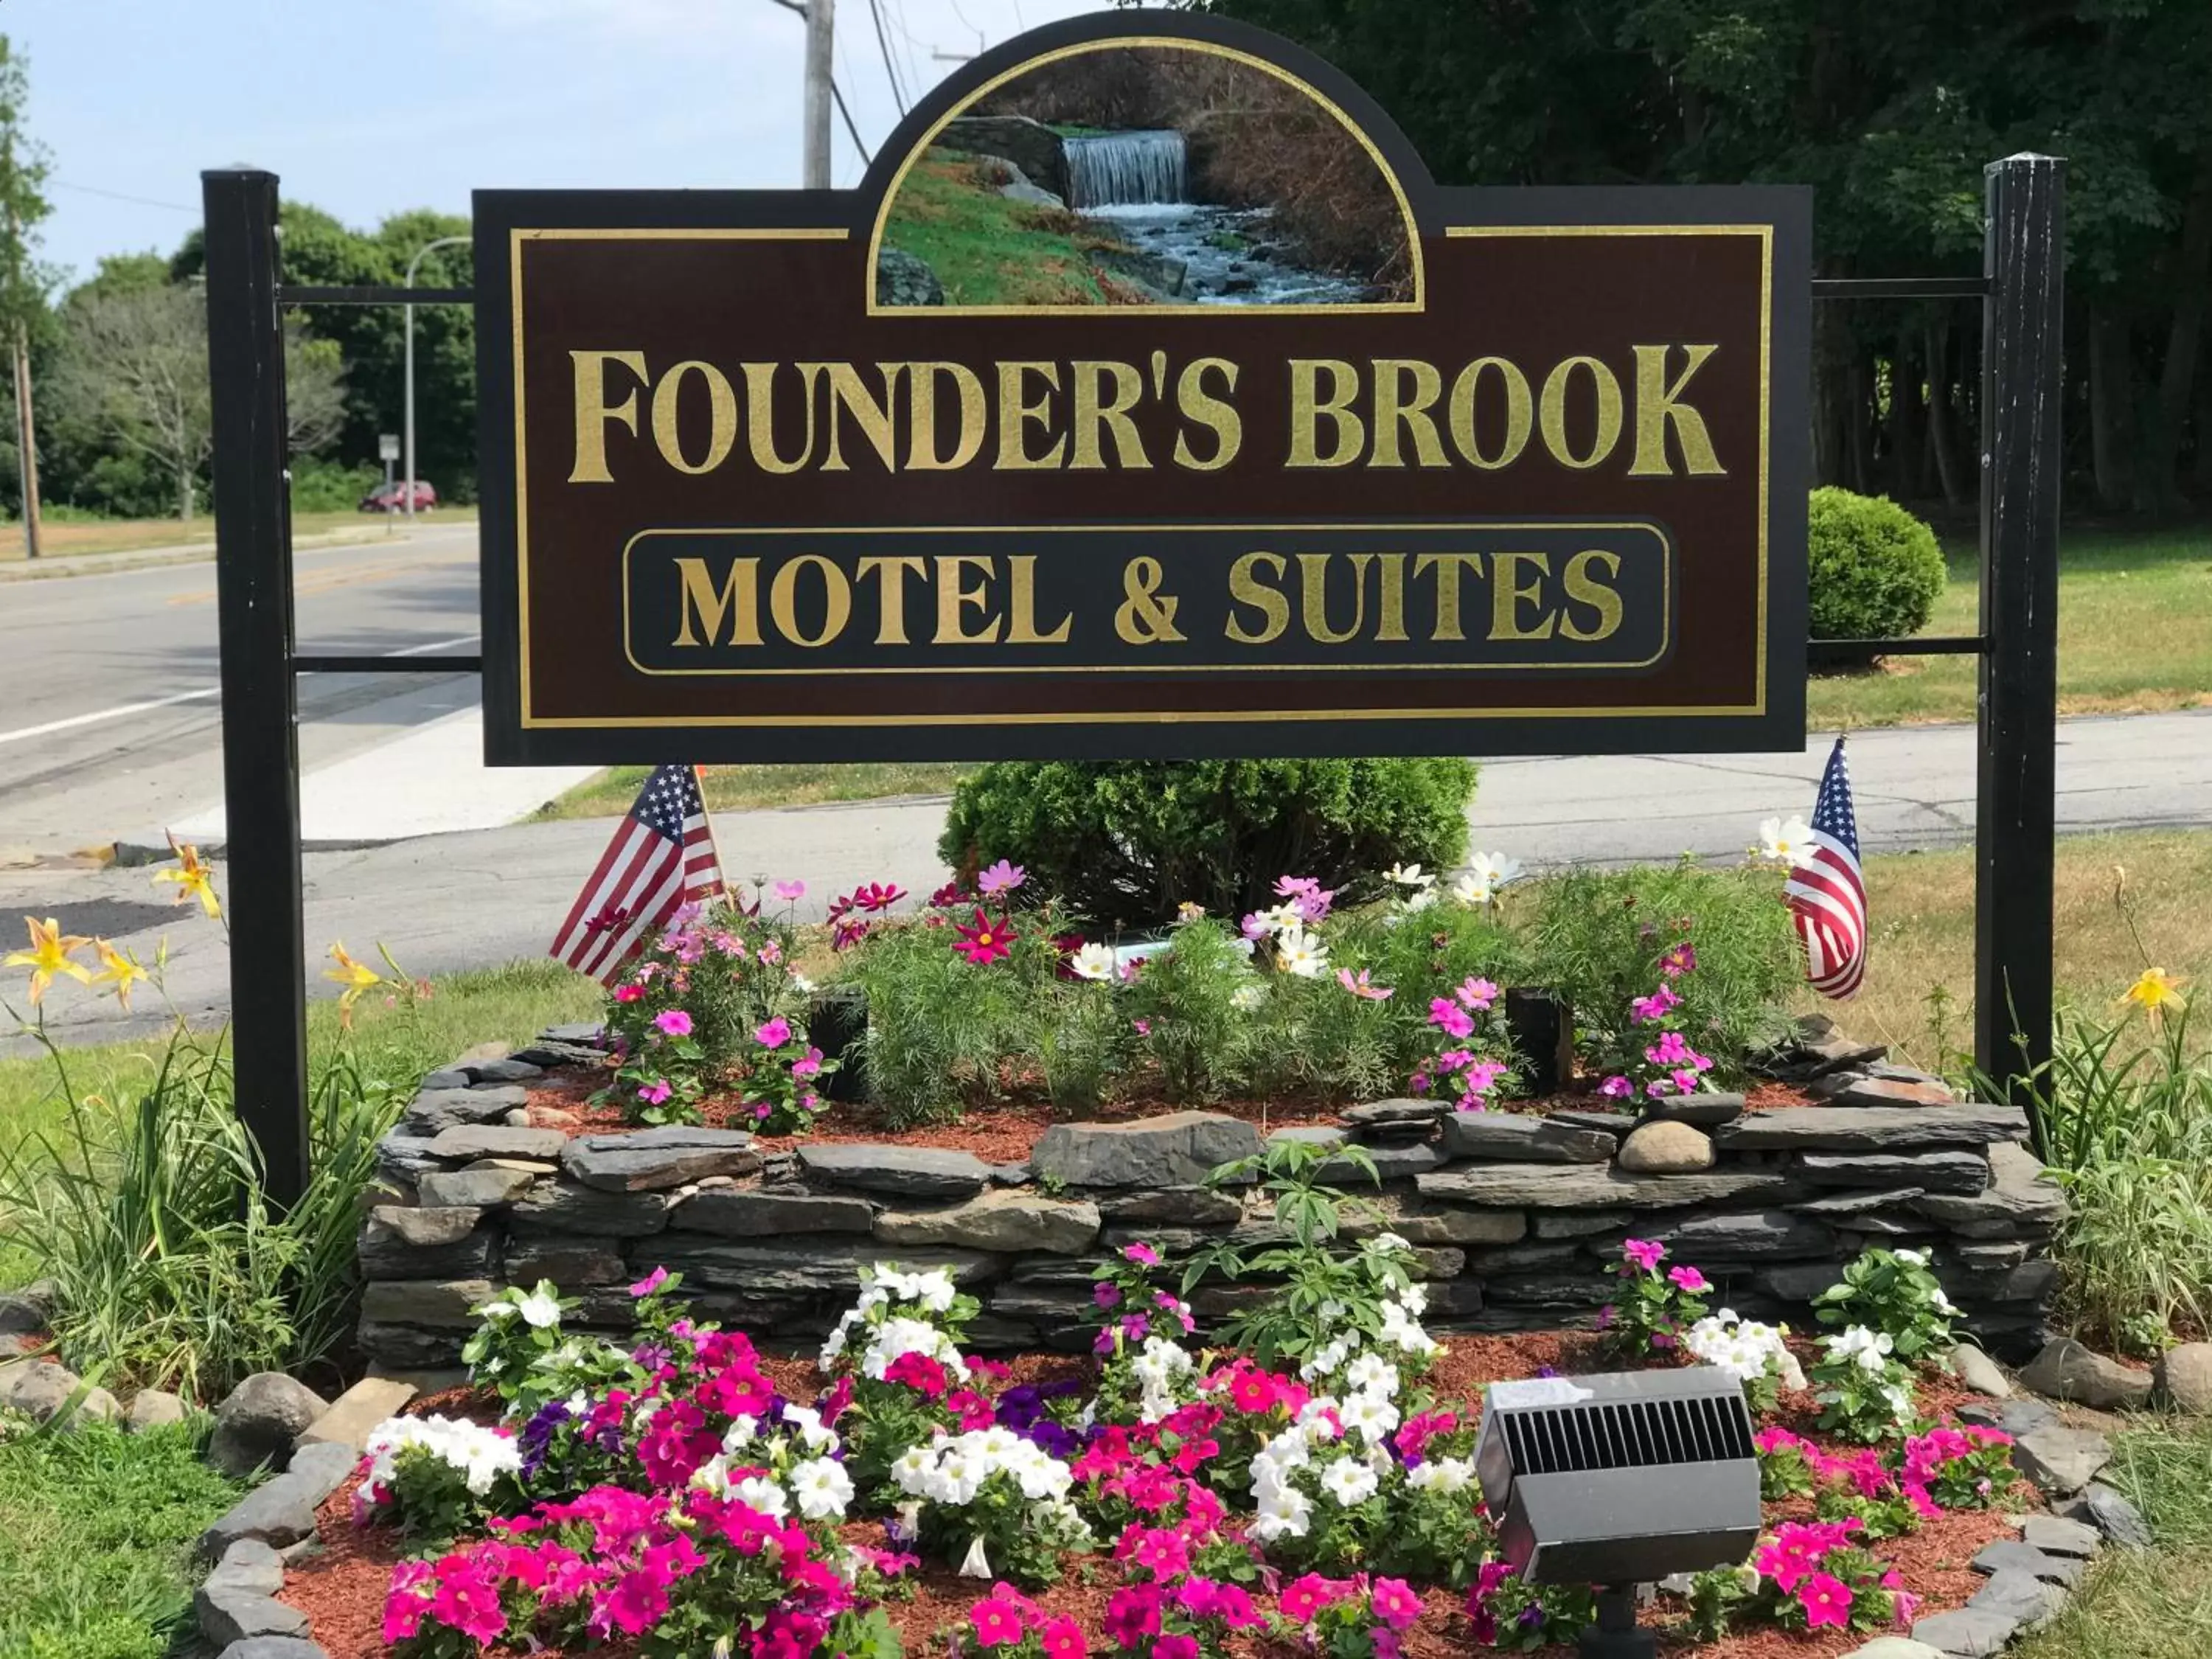 Property logo or sign in Founder's Brook Motel and Suites